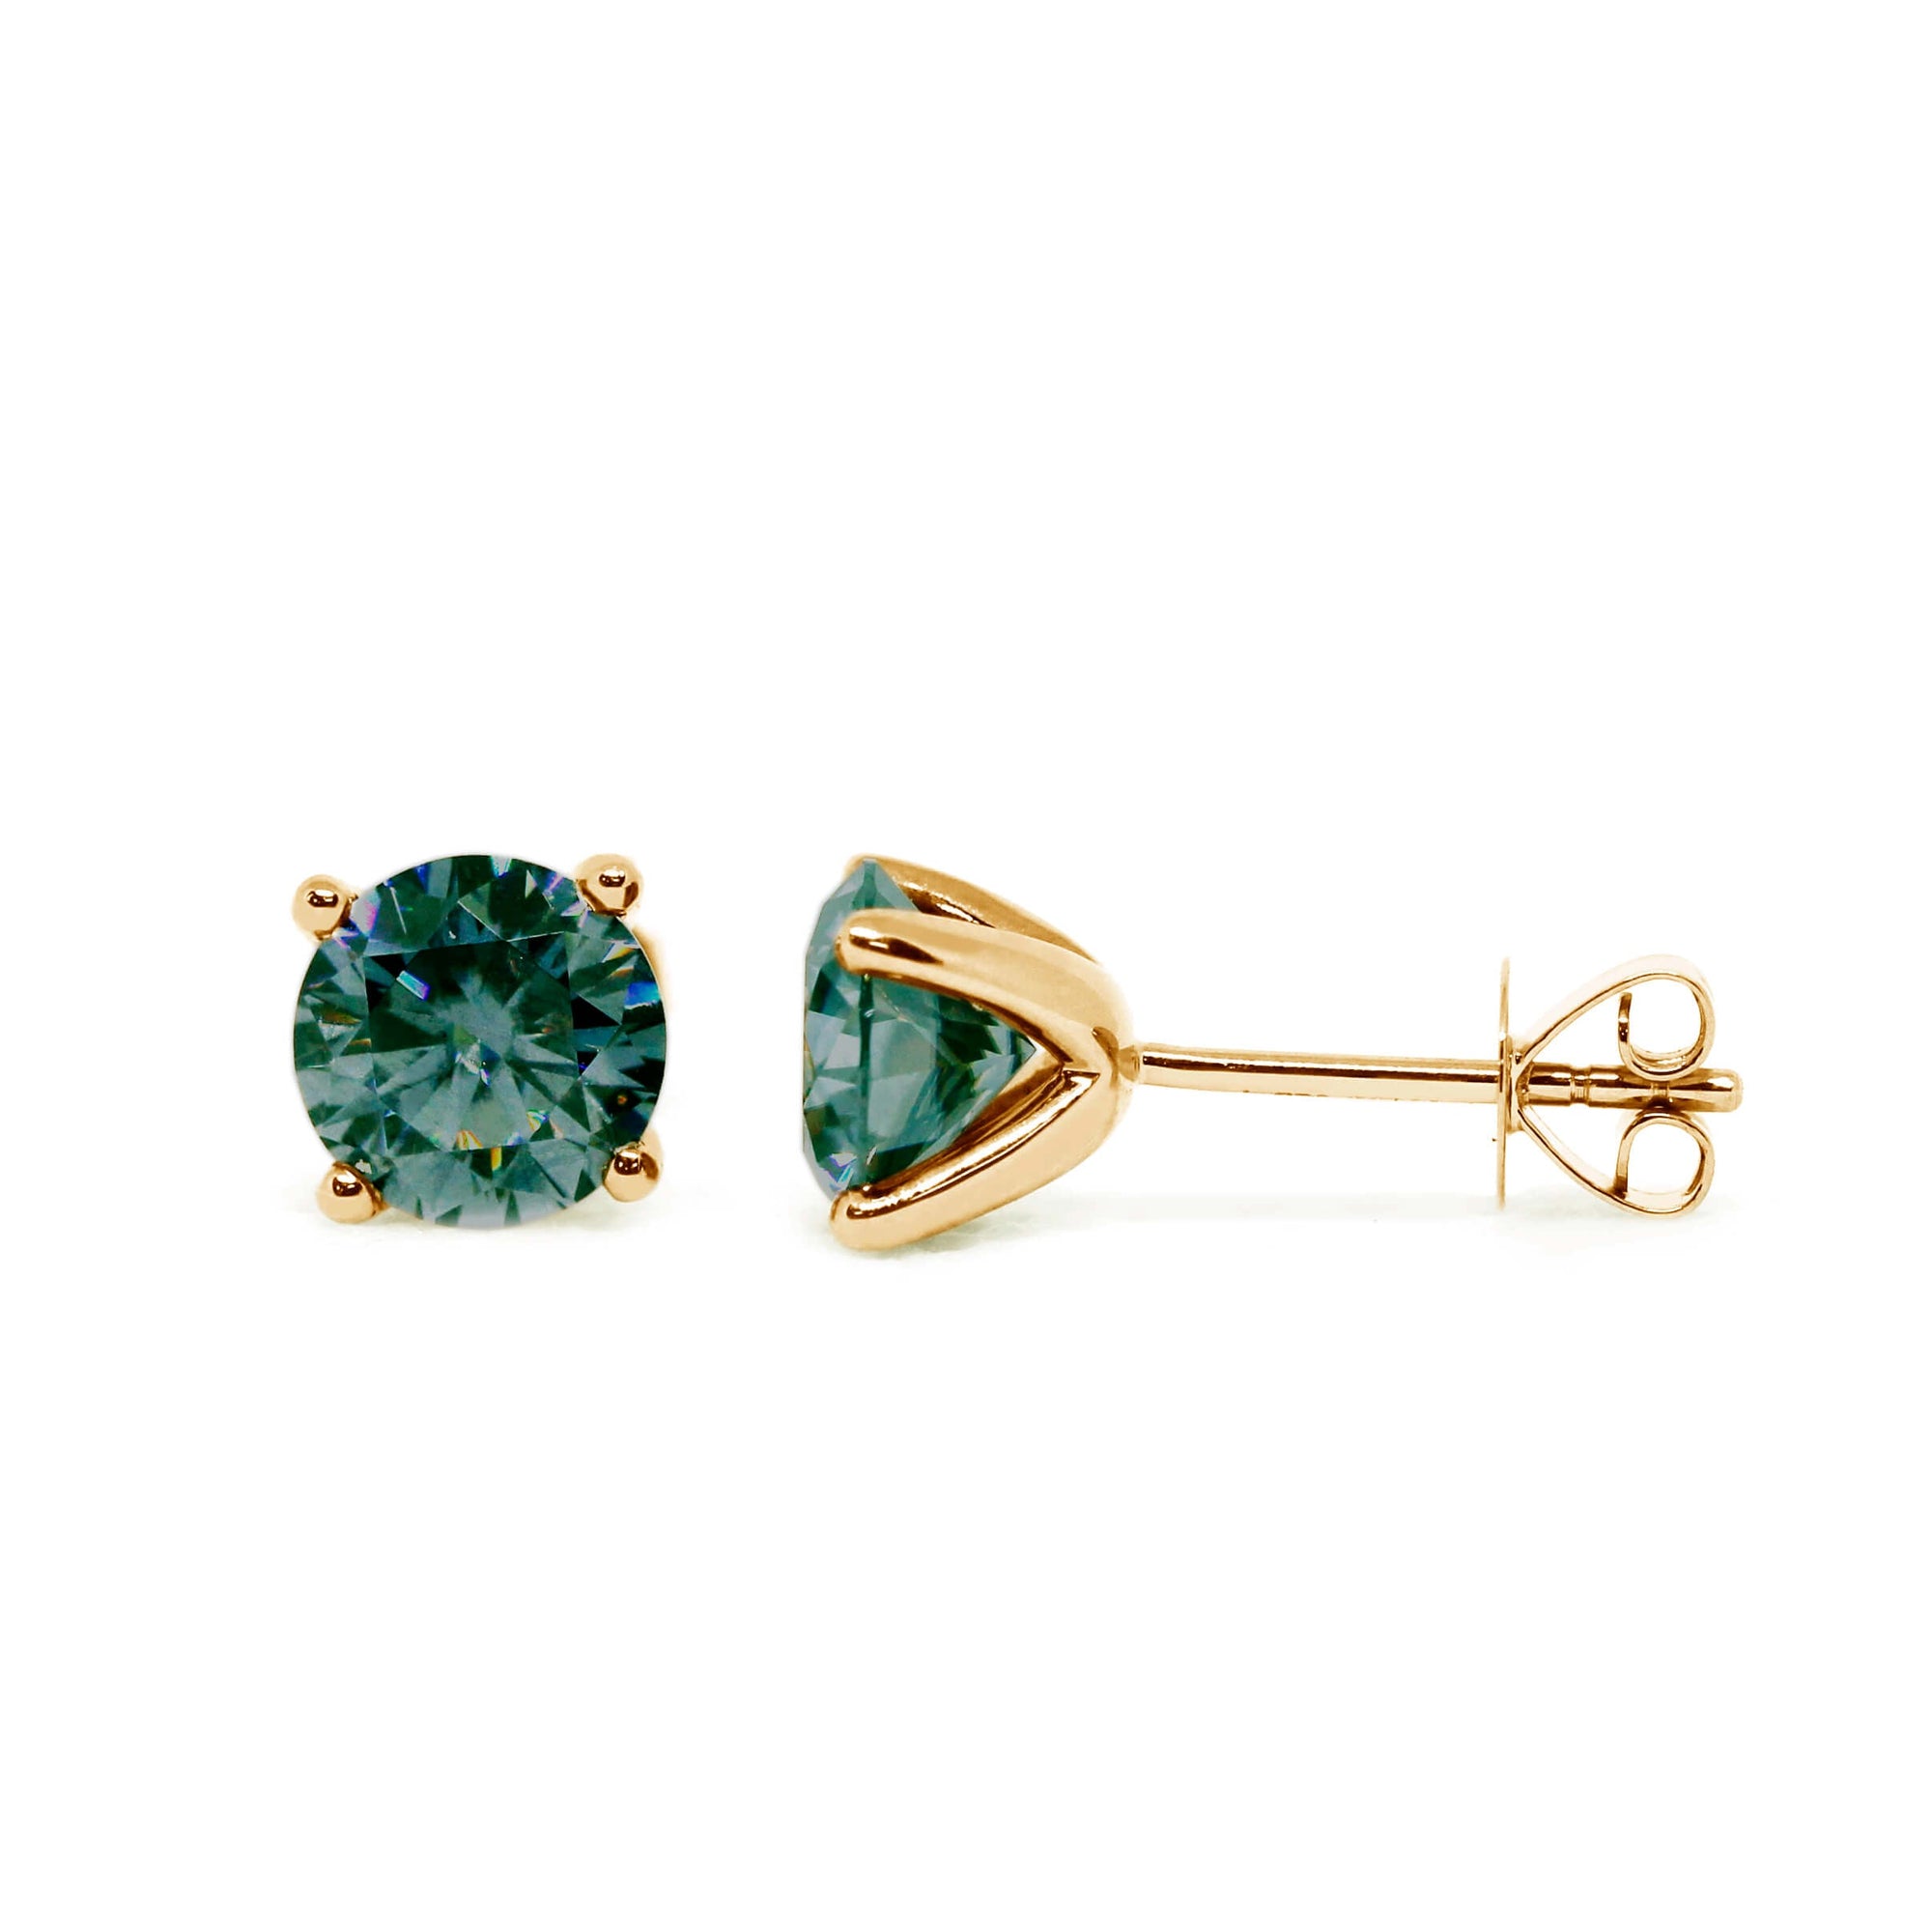 Round Forest Green Moissanite Solitaire in 4 Prong Setting Stud Earrings in 18K gold - LeCaine Gems